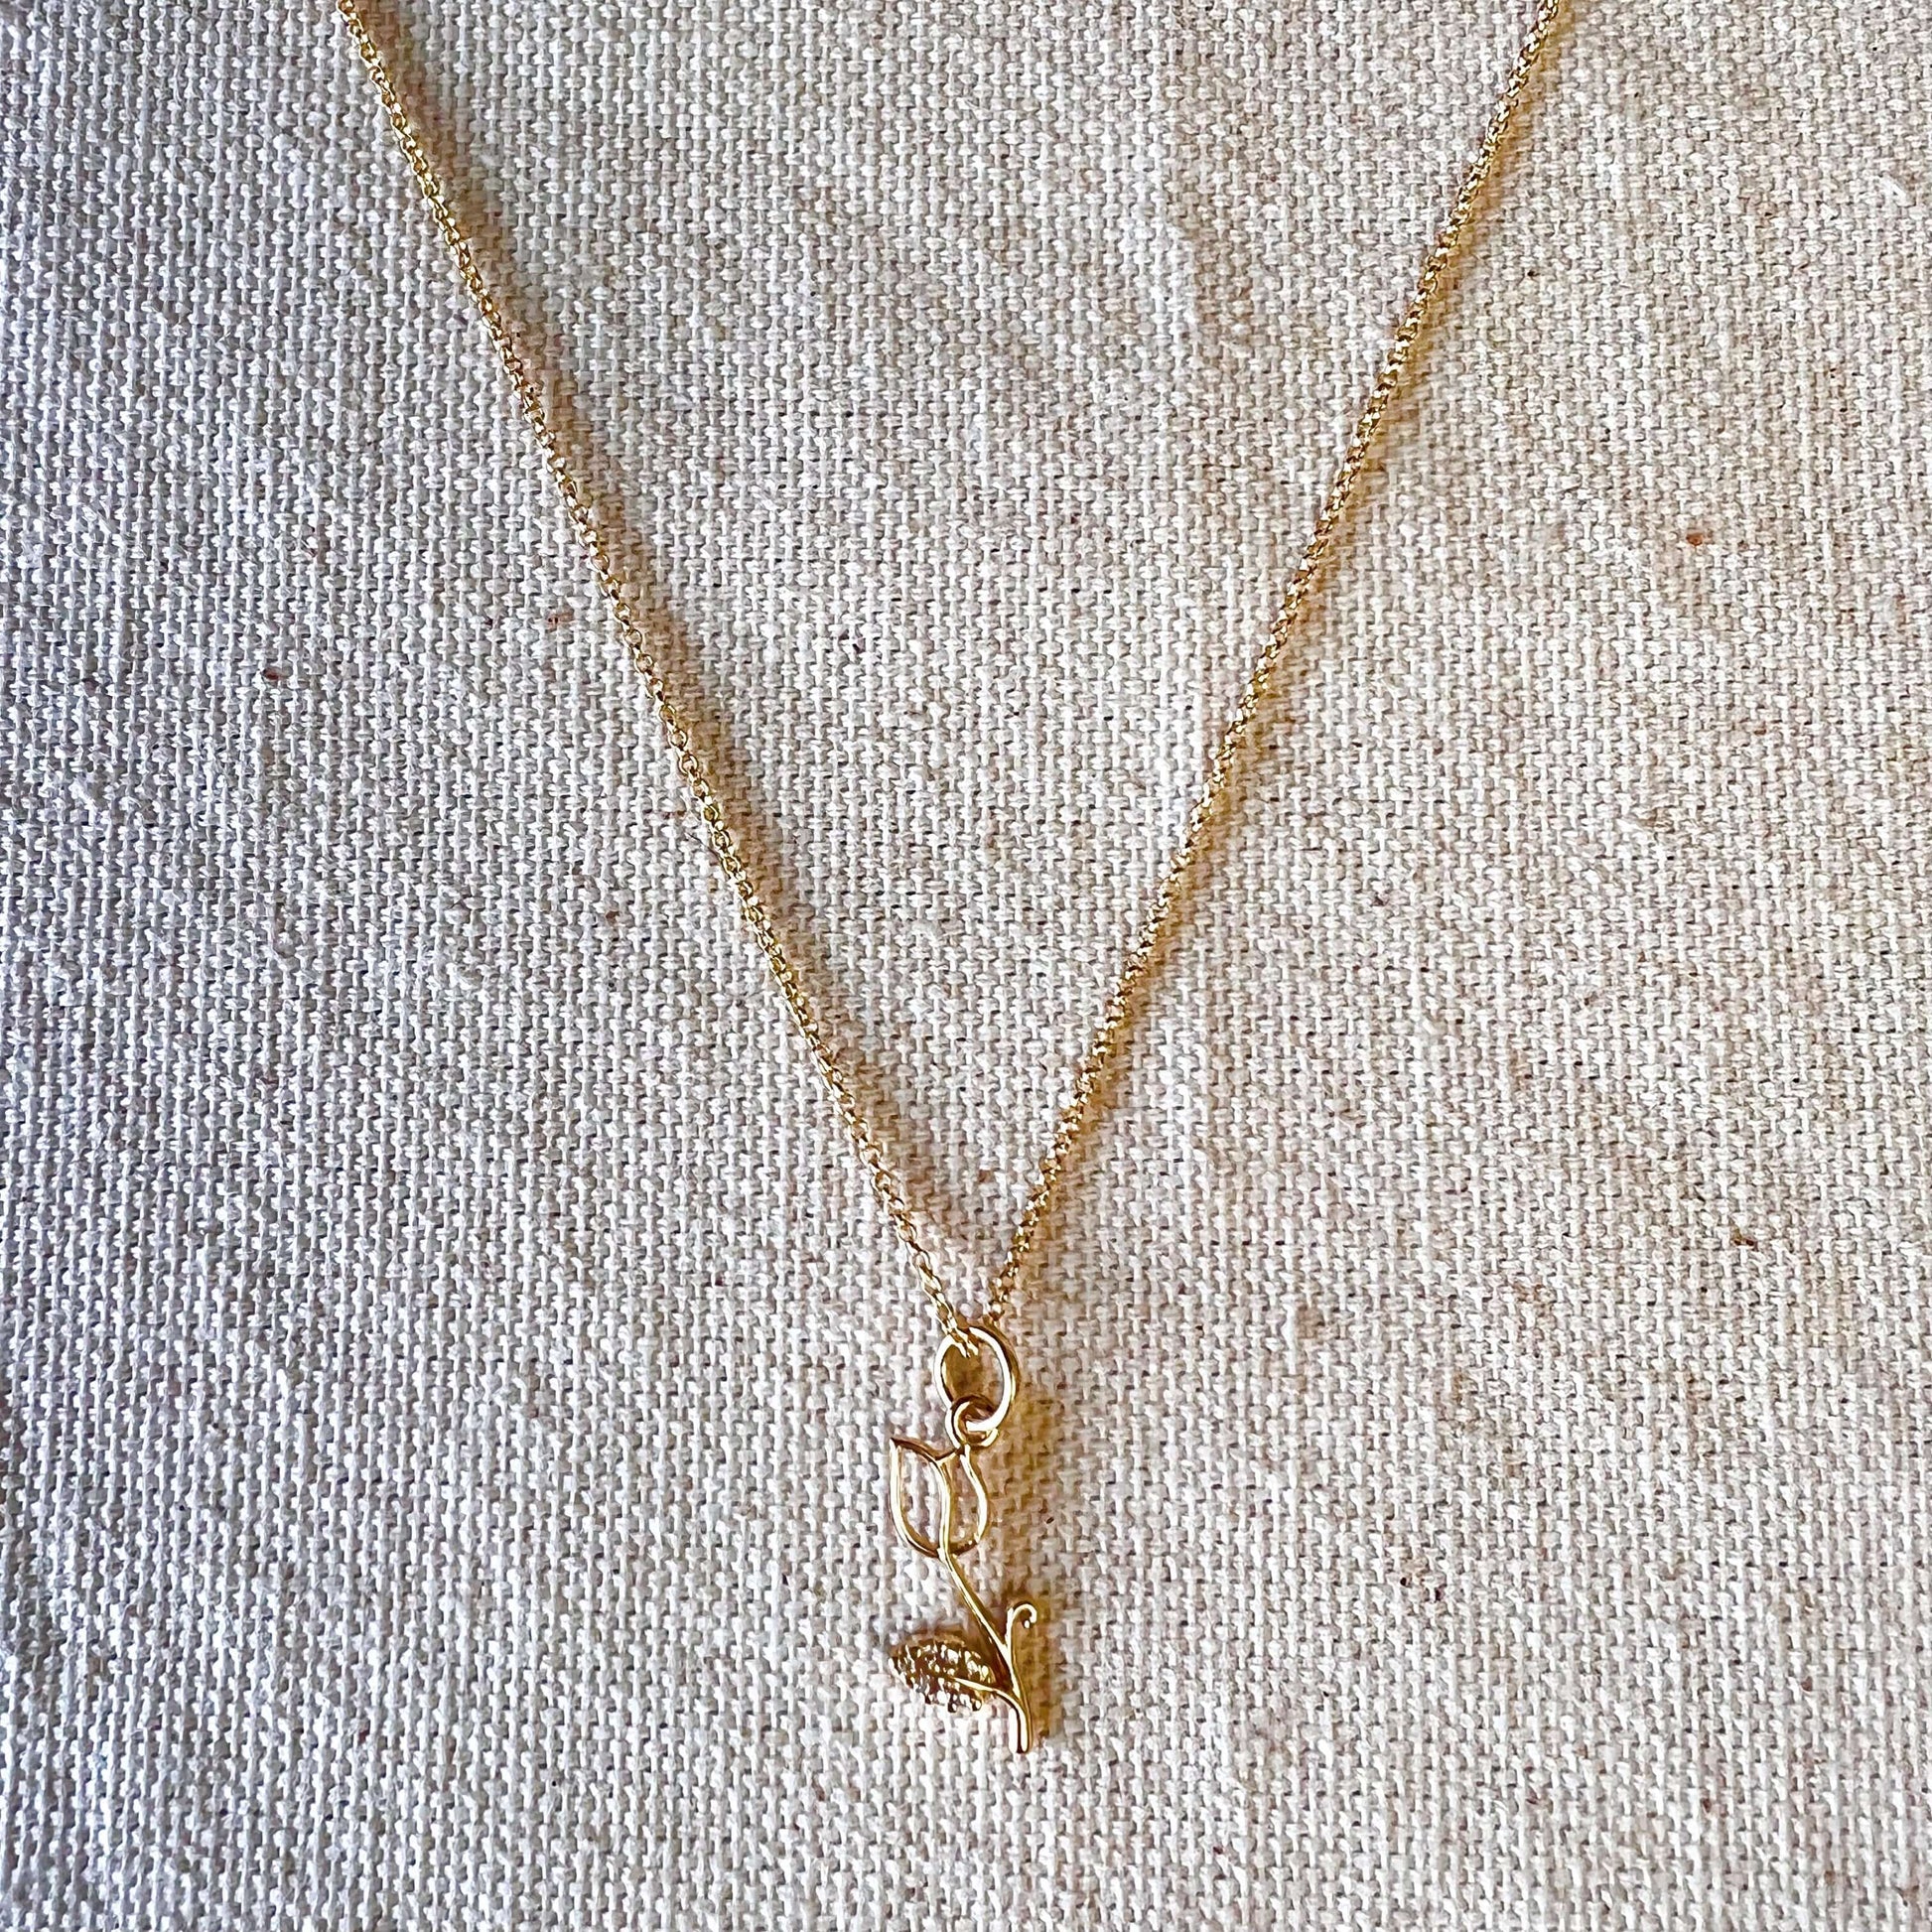 GoldFi 18k Gold Filled Tulip Charm Necklace